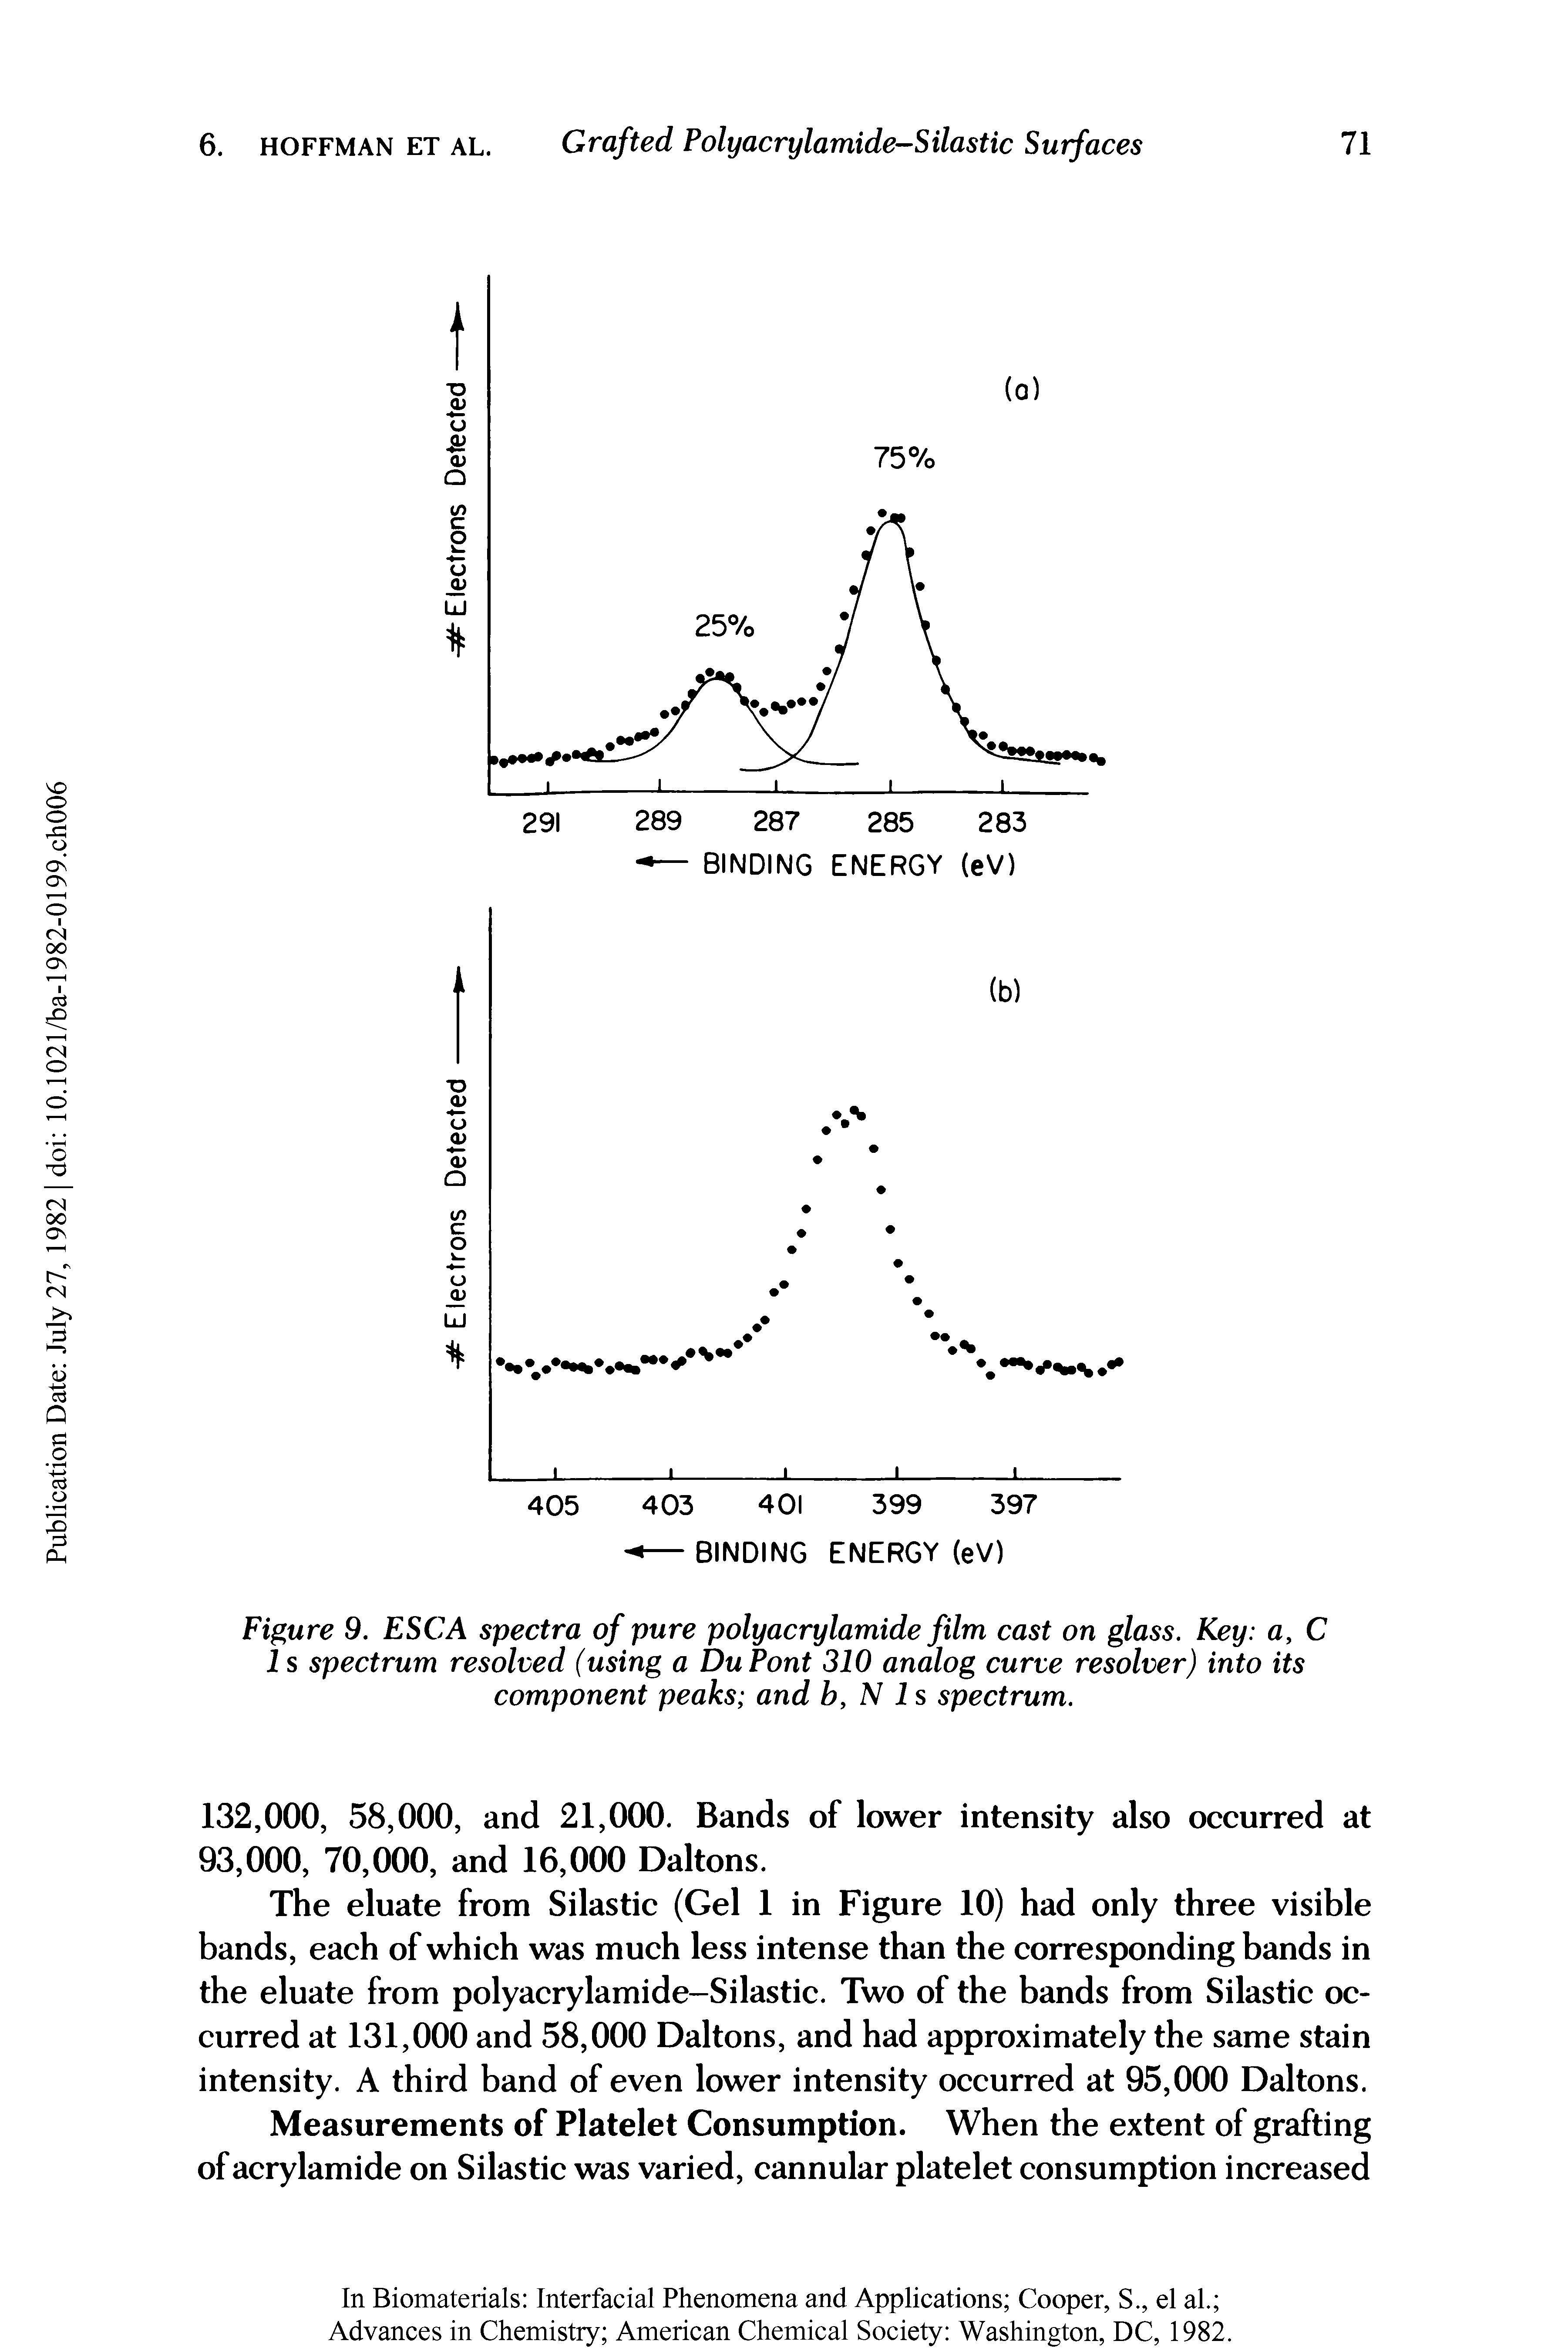 Figure 9. ESC A spectra of pure polyacrylamide film cast on glass. Key a, C 1 s spectrum resolved (using a DuPont 310 analog curve resolver) into its component peaks and b, N 1 s spectrum.